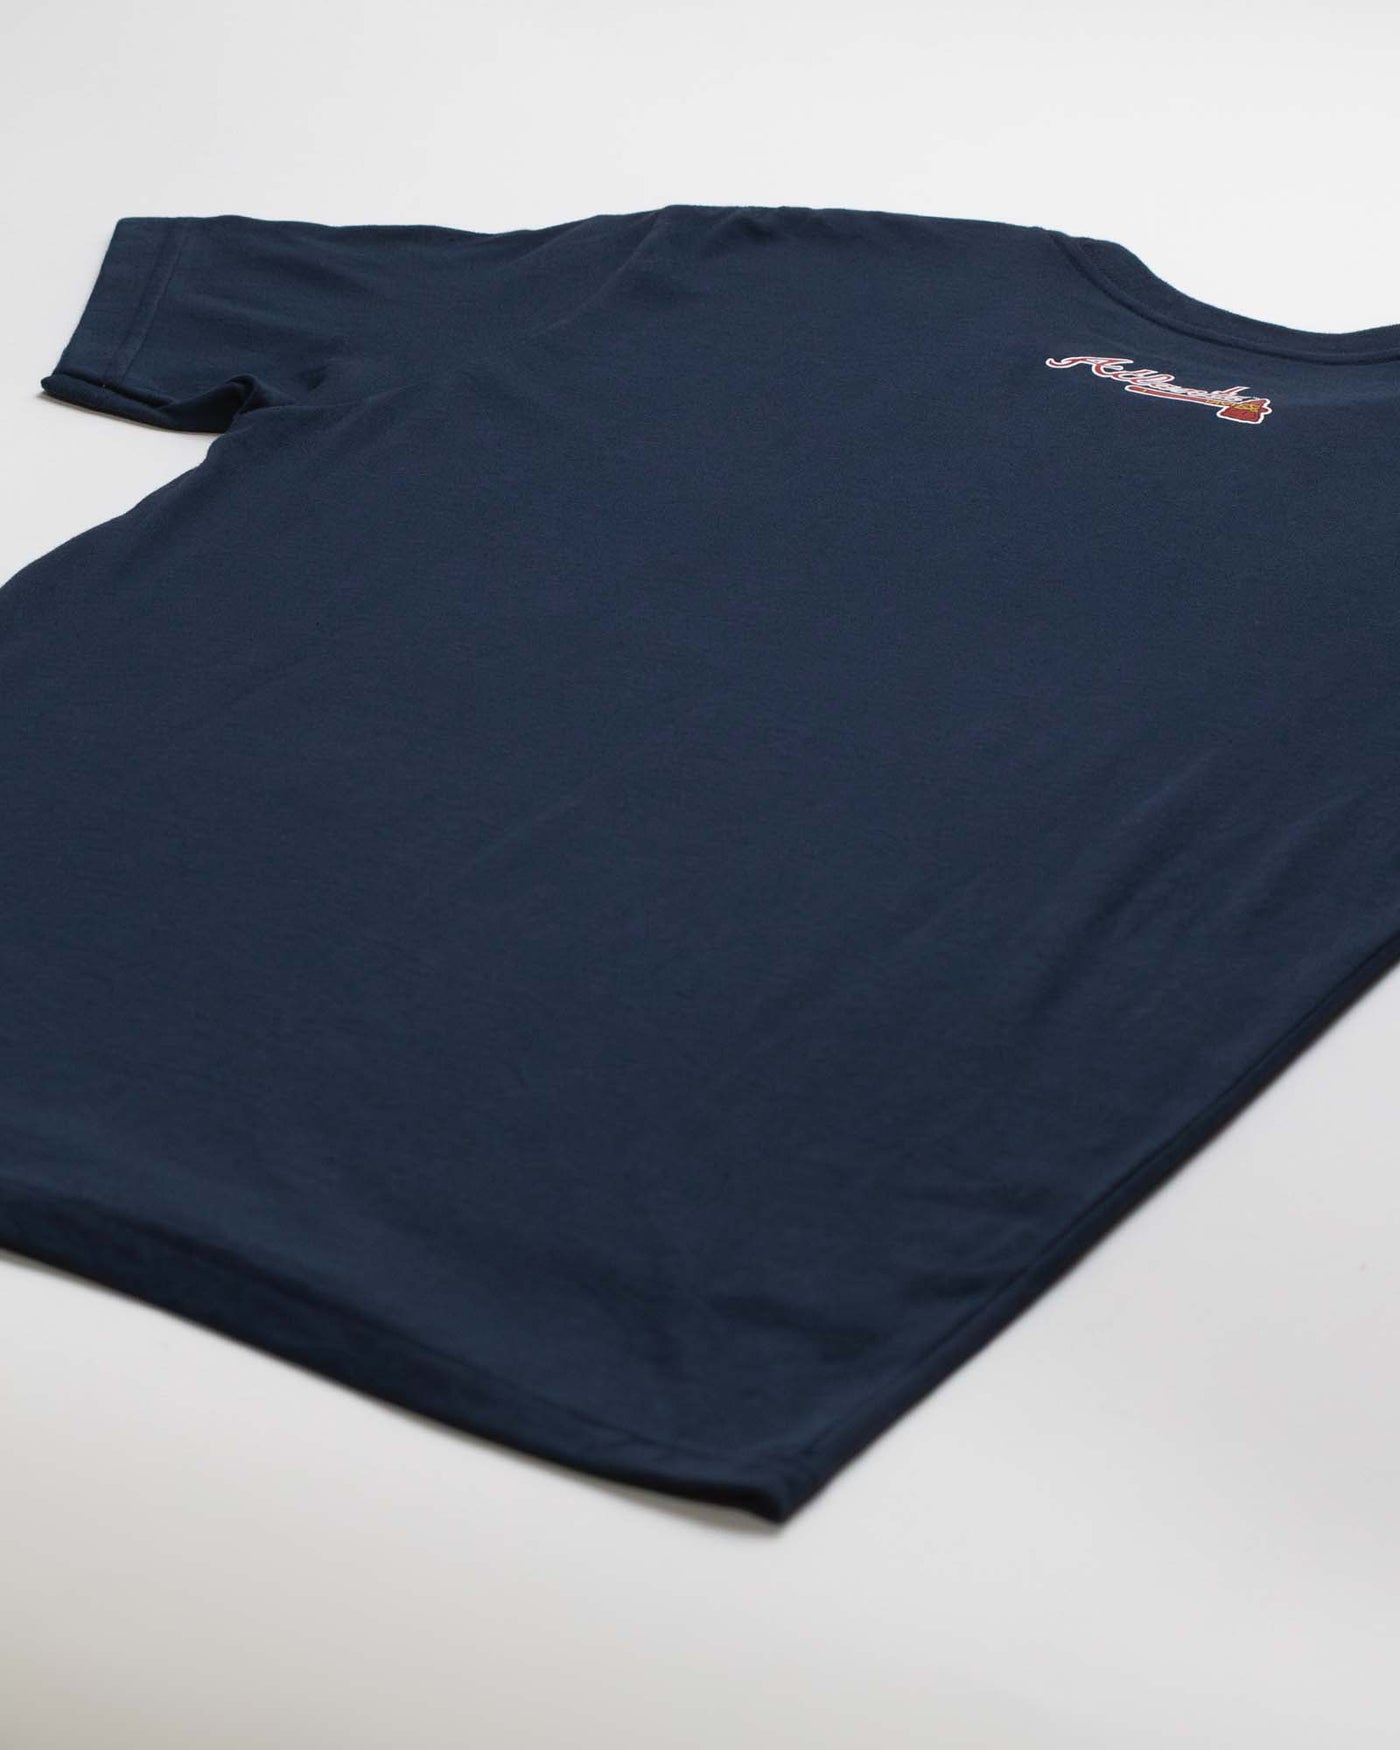 Outfield Fence Tee - Atlanta Braves